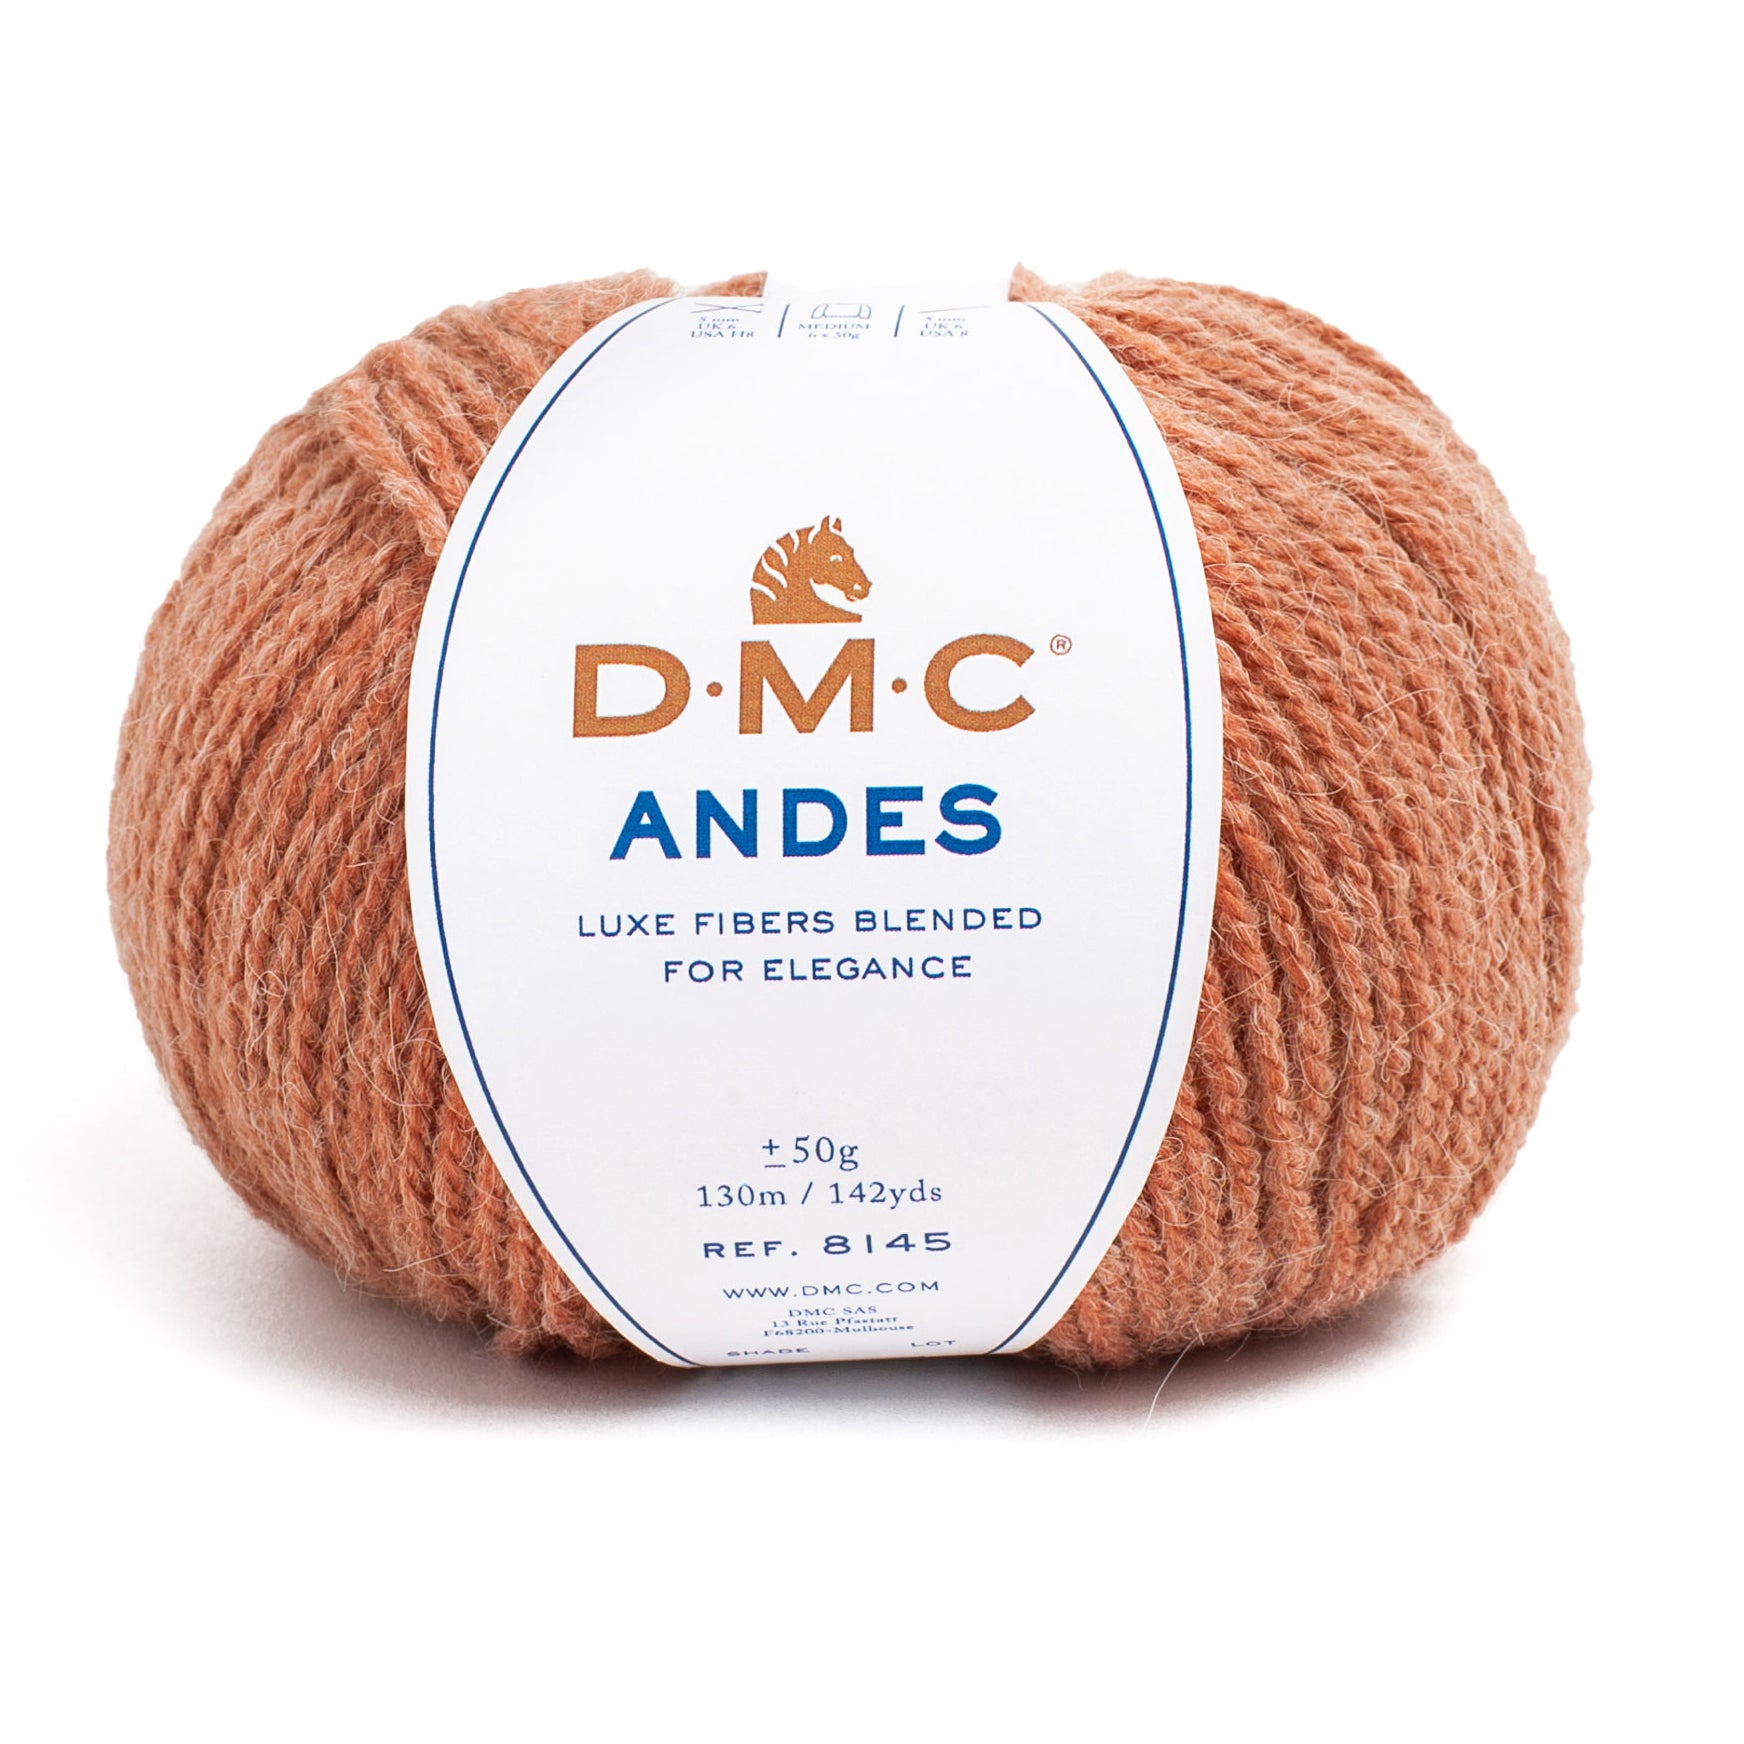 DMC ANDES - the perfect combination of luxury and quality